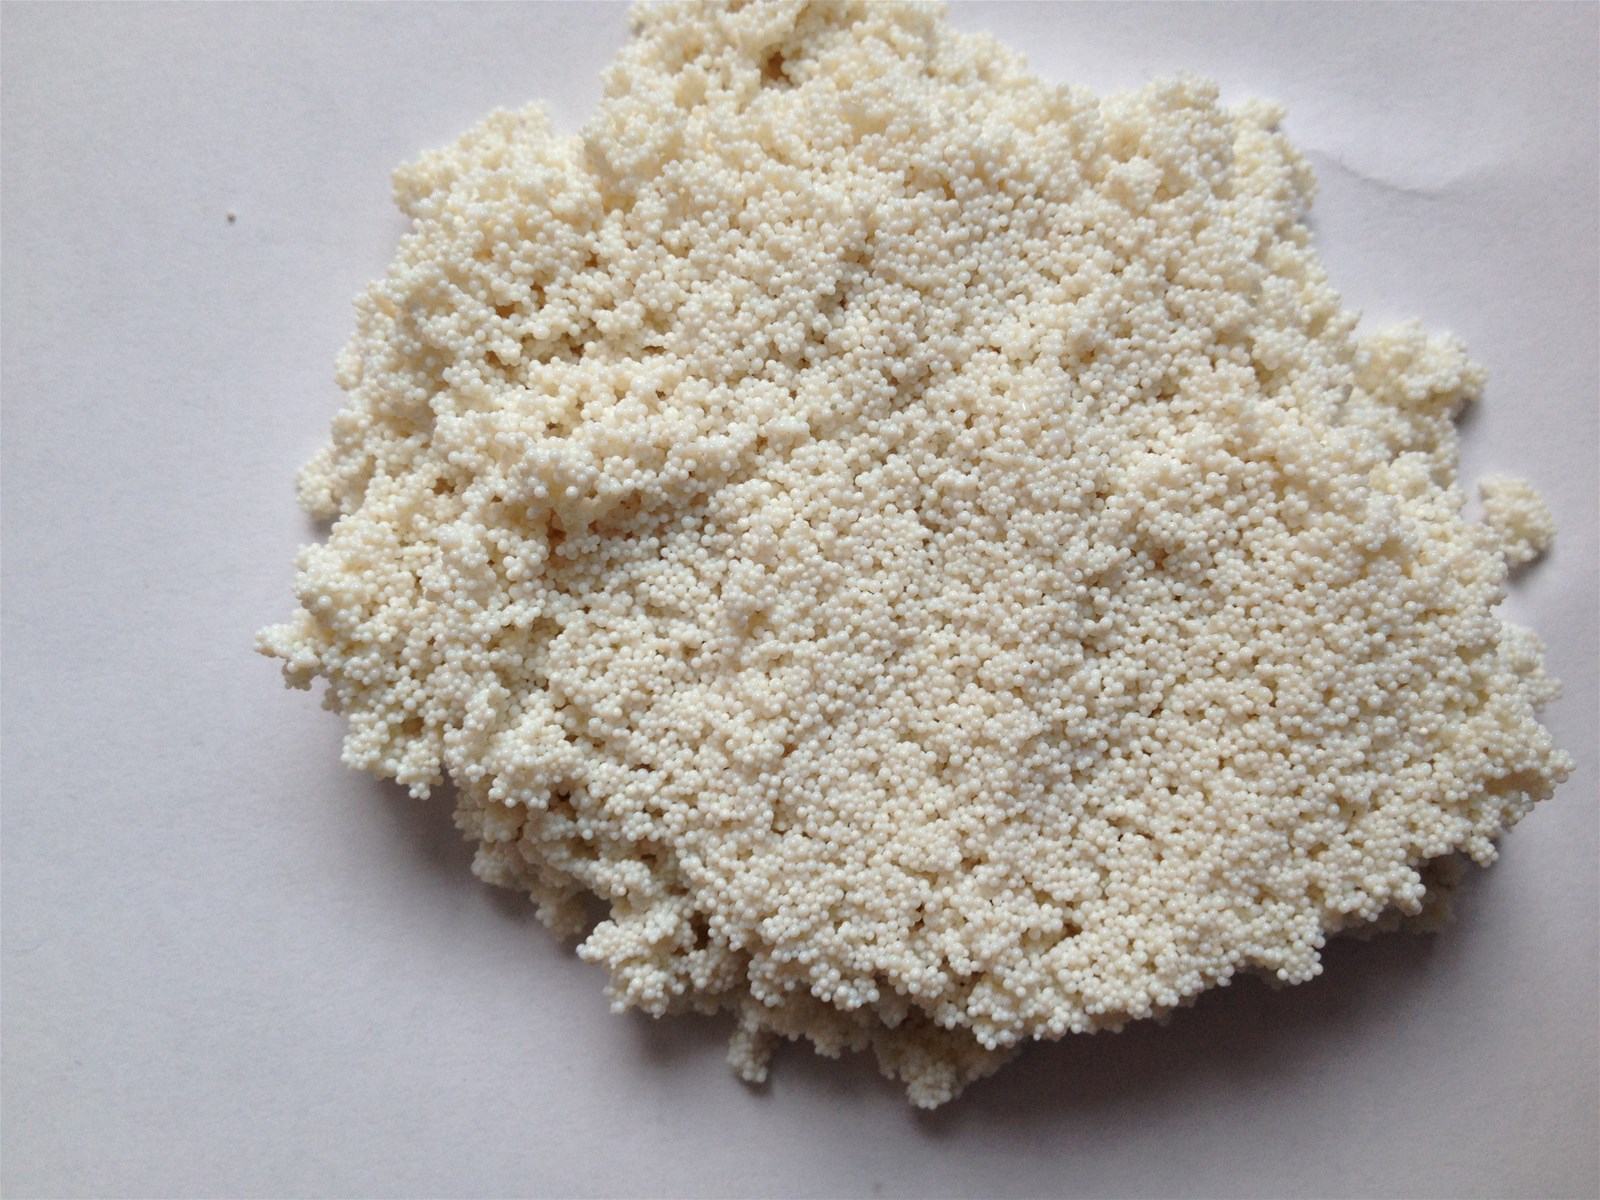 Lithium extraction by ion exchange resin